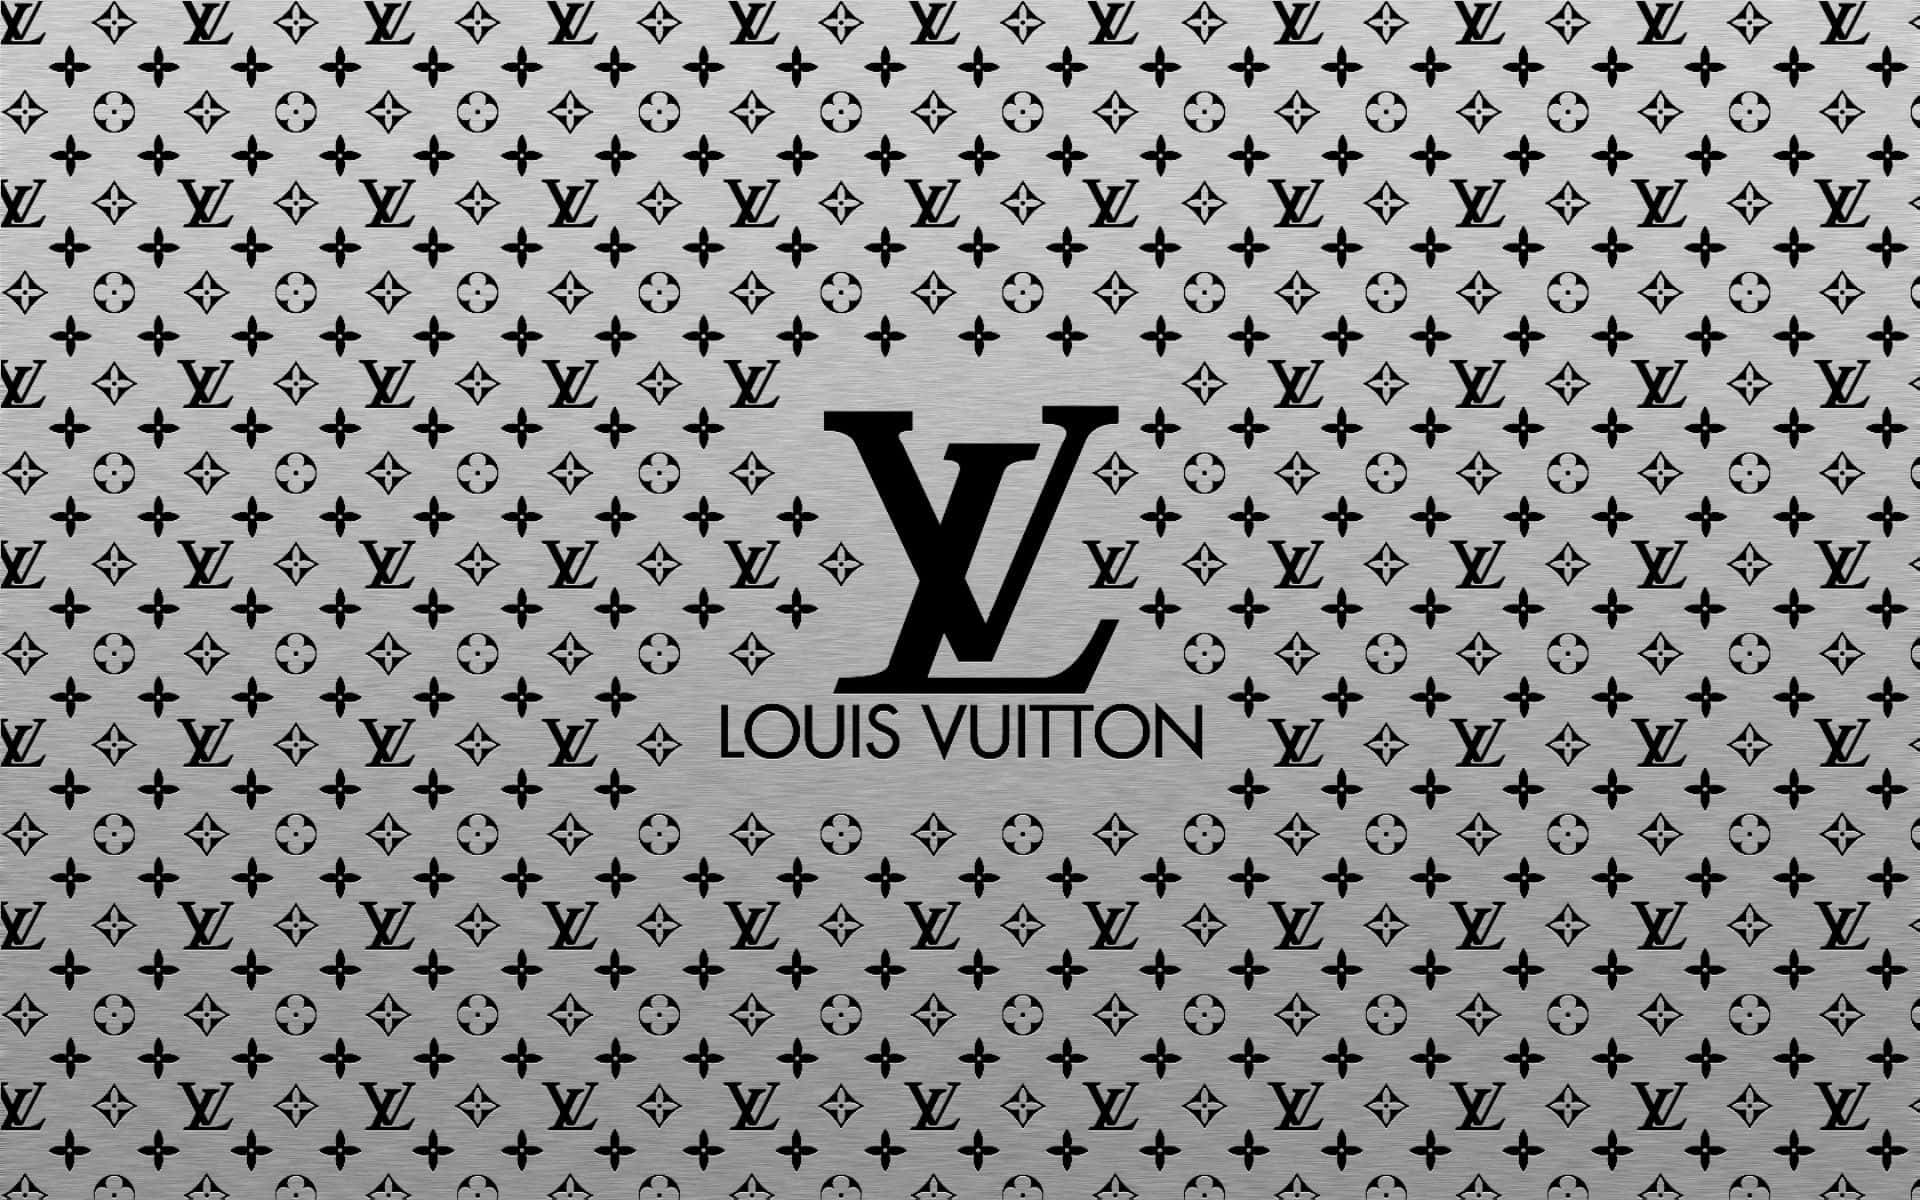 Download Step Up Your Style Game in Cool Louis Vuitton Wallpaper